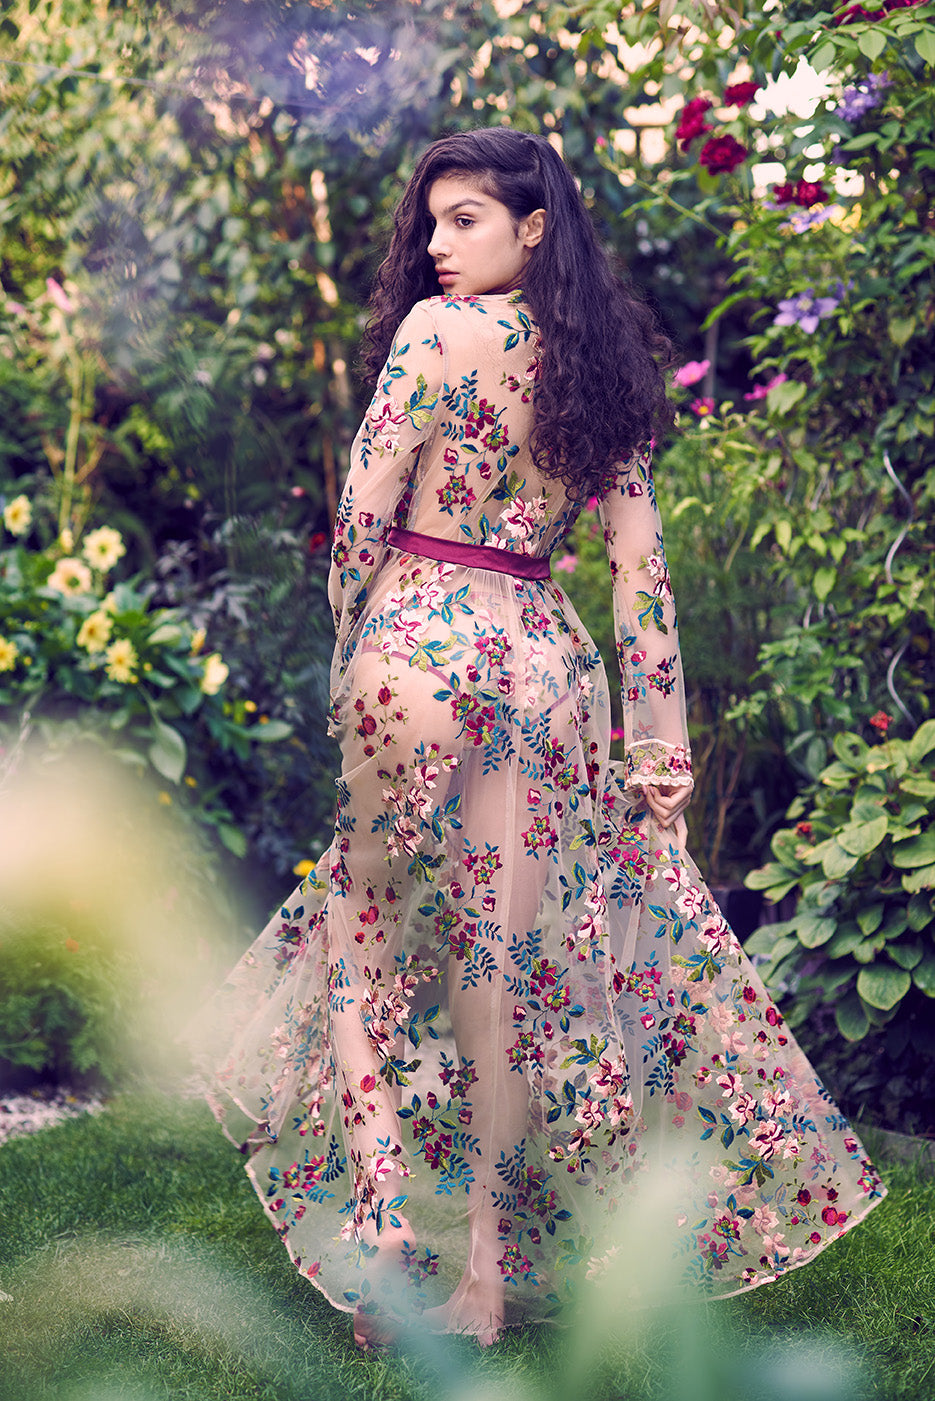 Vintage inspired, floral embroidered robe with floor length skirt